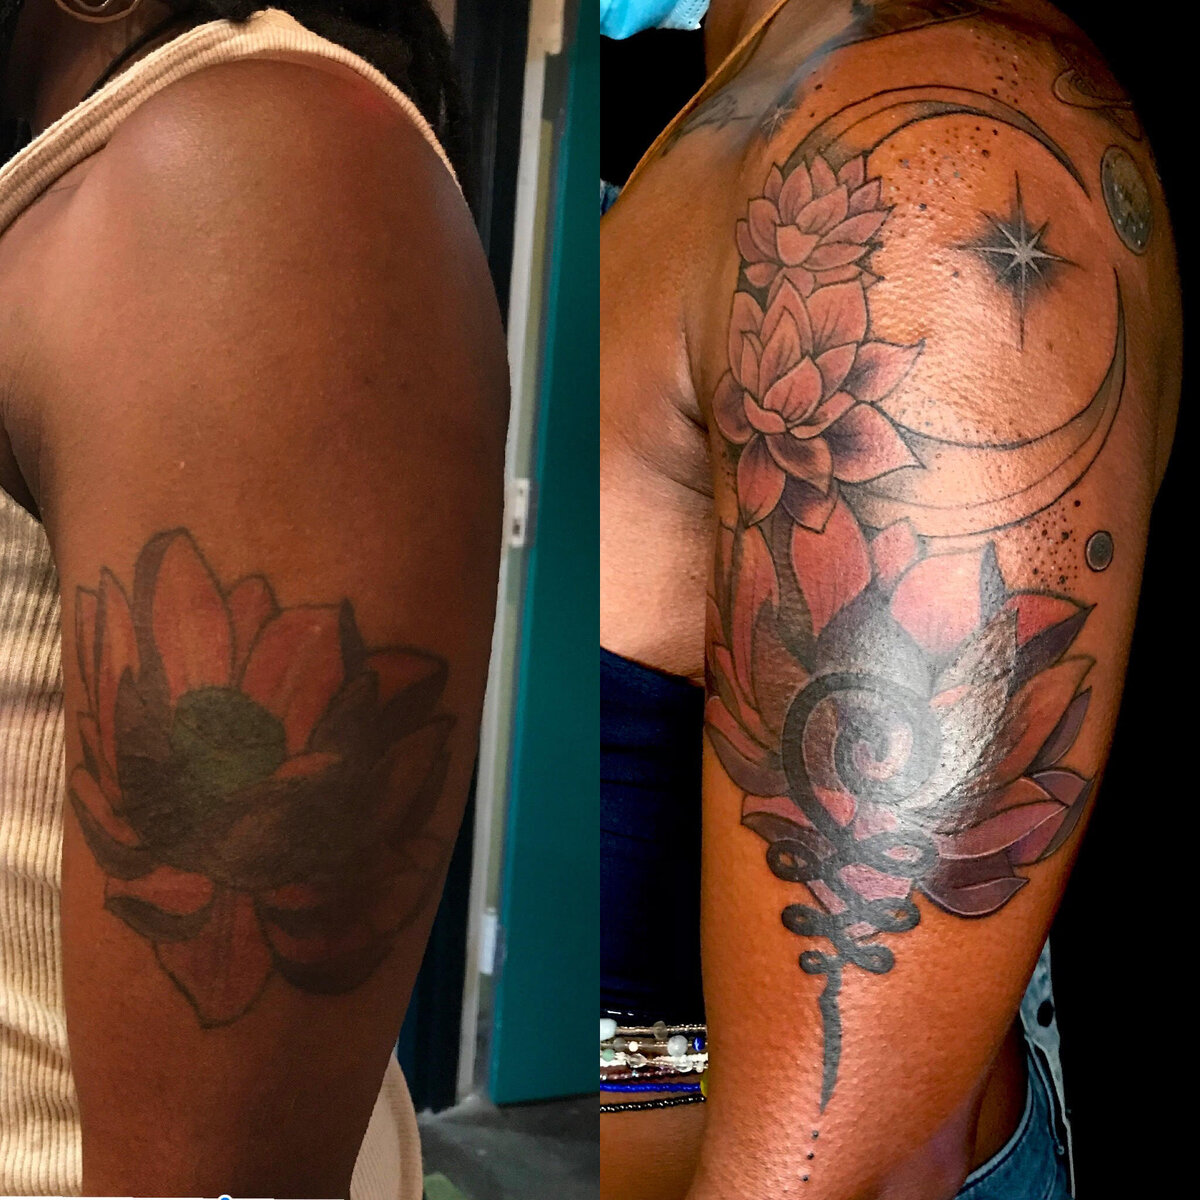 Black Owned Tattoo Studios You Should Know - SHOPPE BLACK